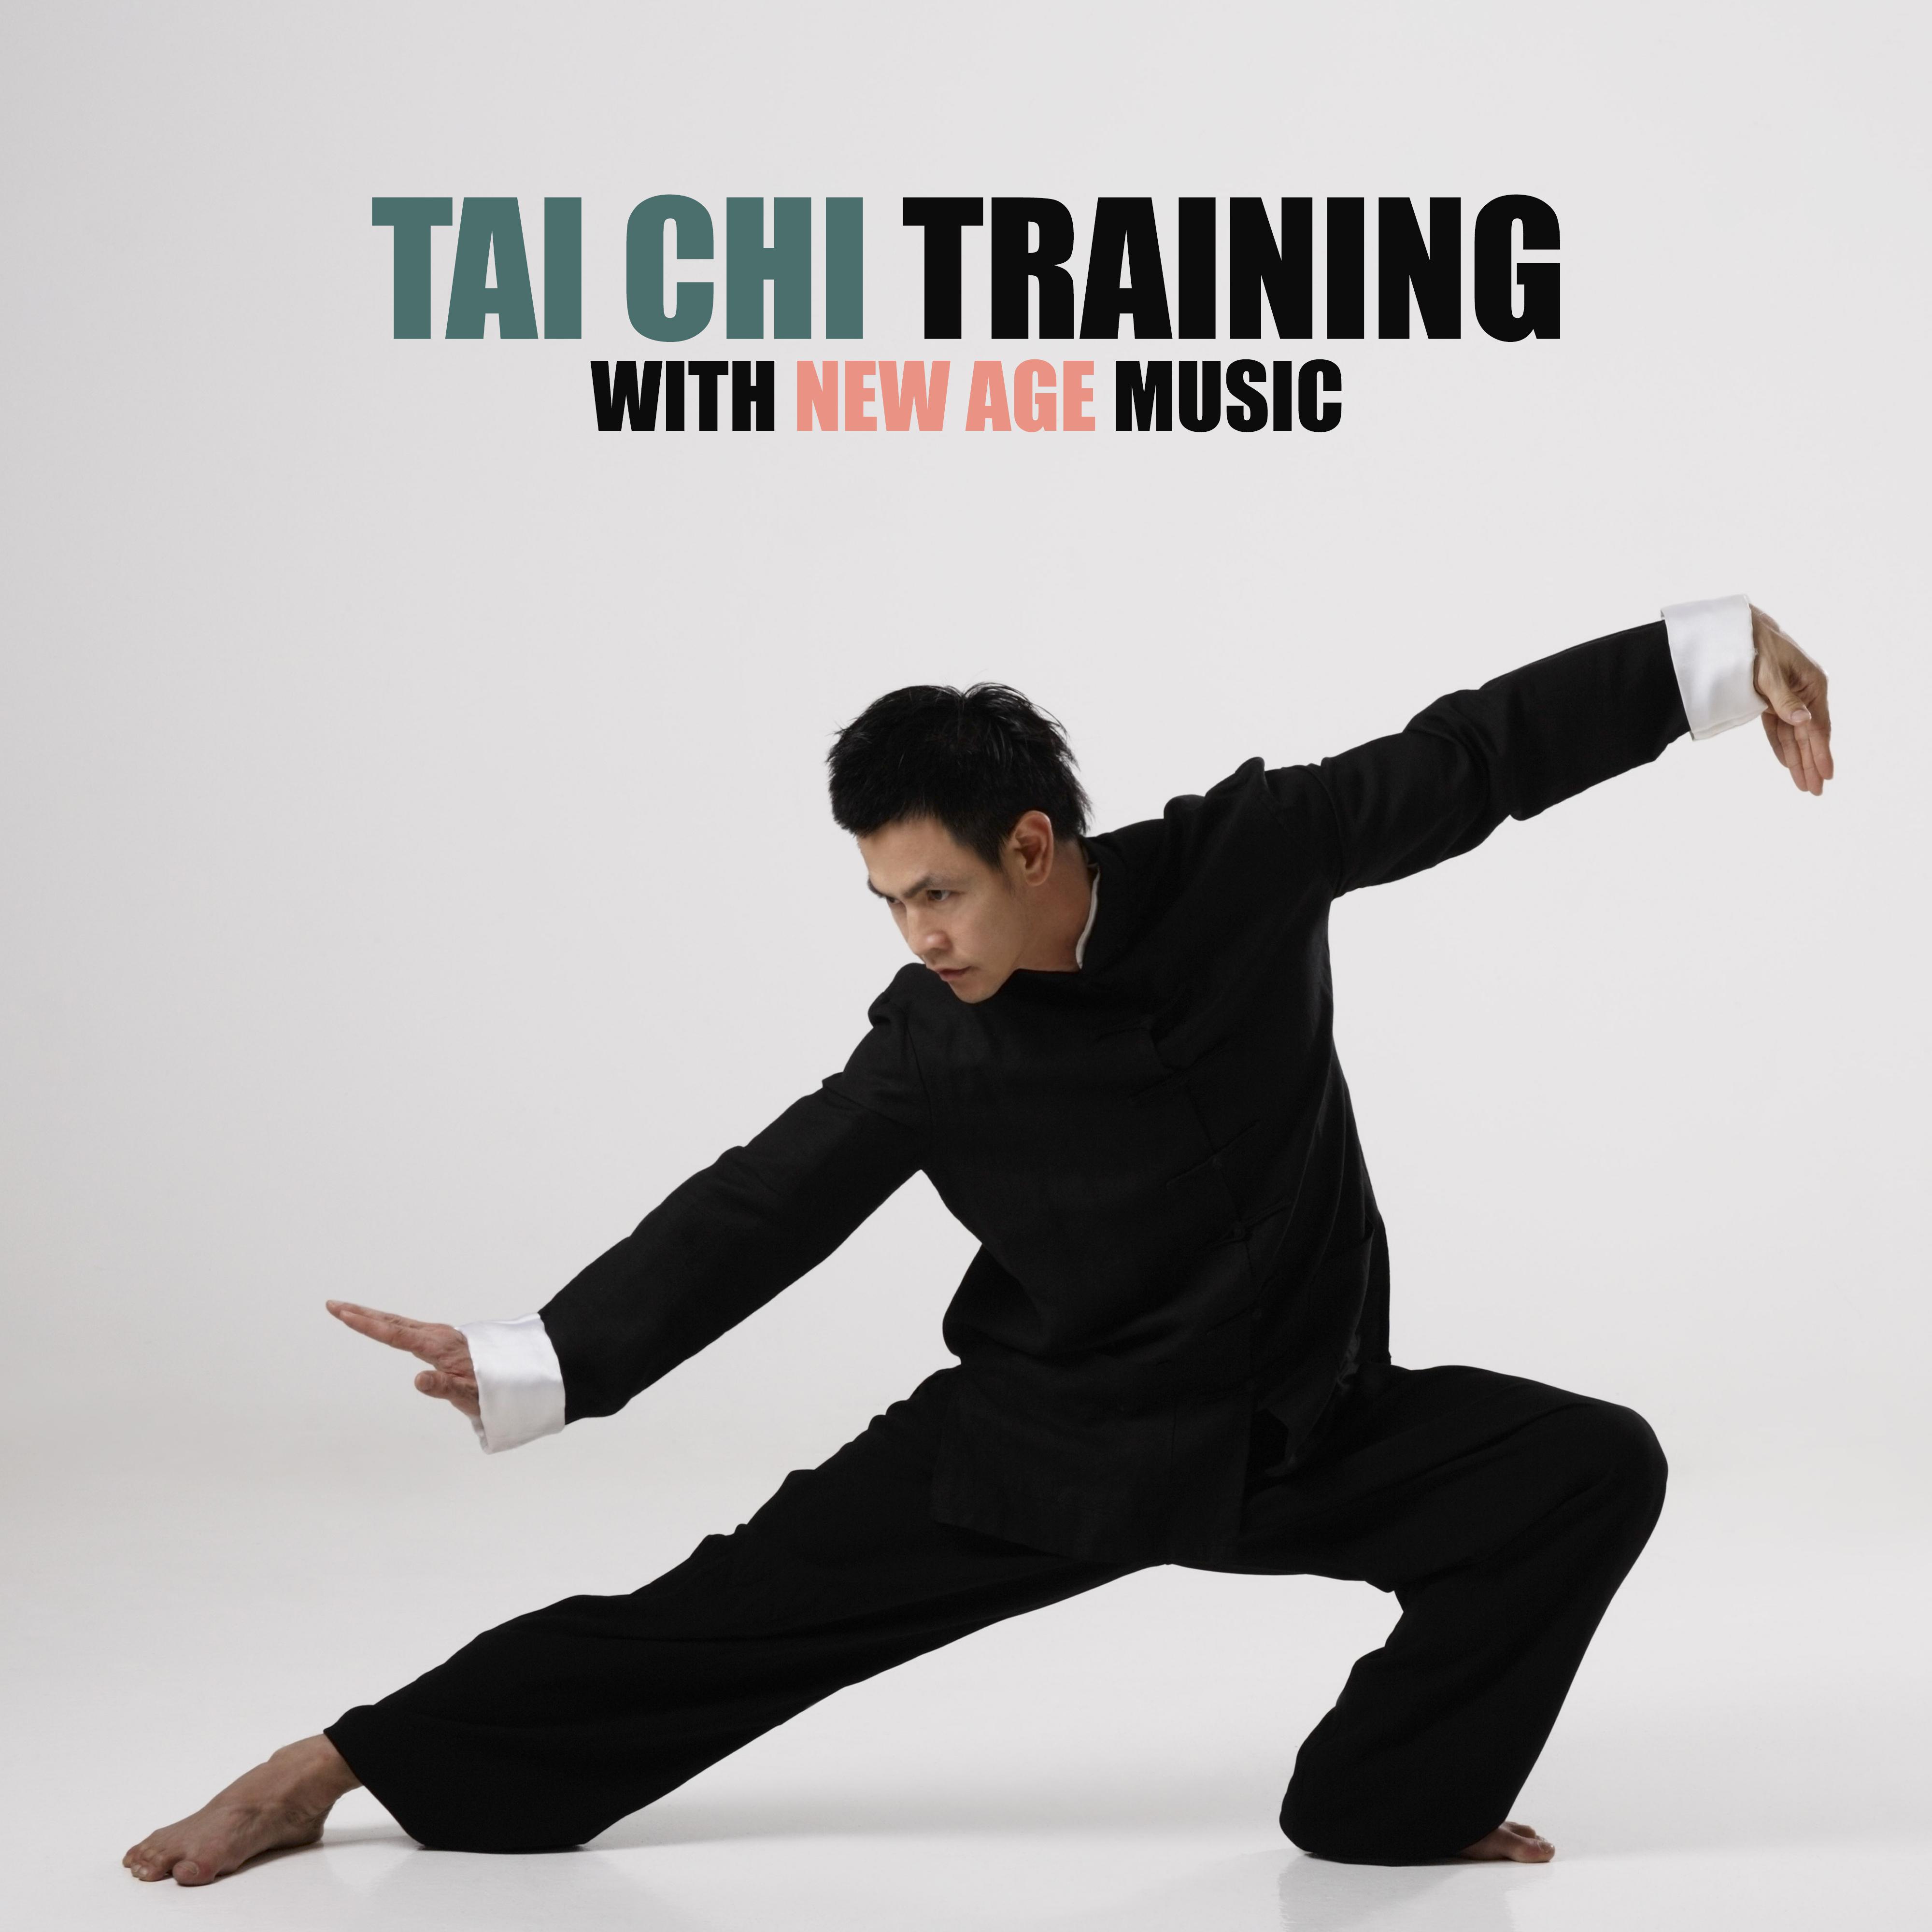 Tai Chi Training with New Age Music: 15 Deep 2019 Songs for Perfect Tai Chi Experience, Yoga Meditation Session, Inner Calmness, Stress Management